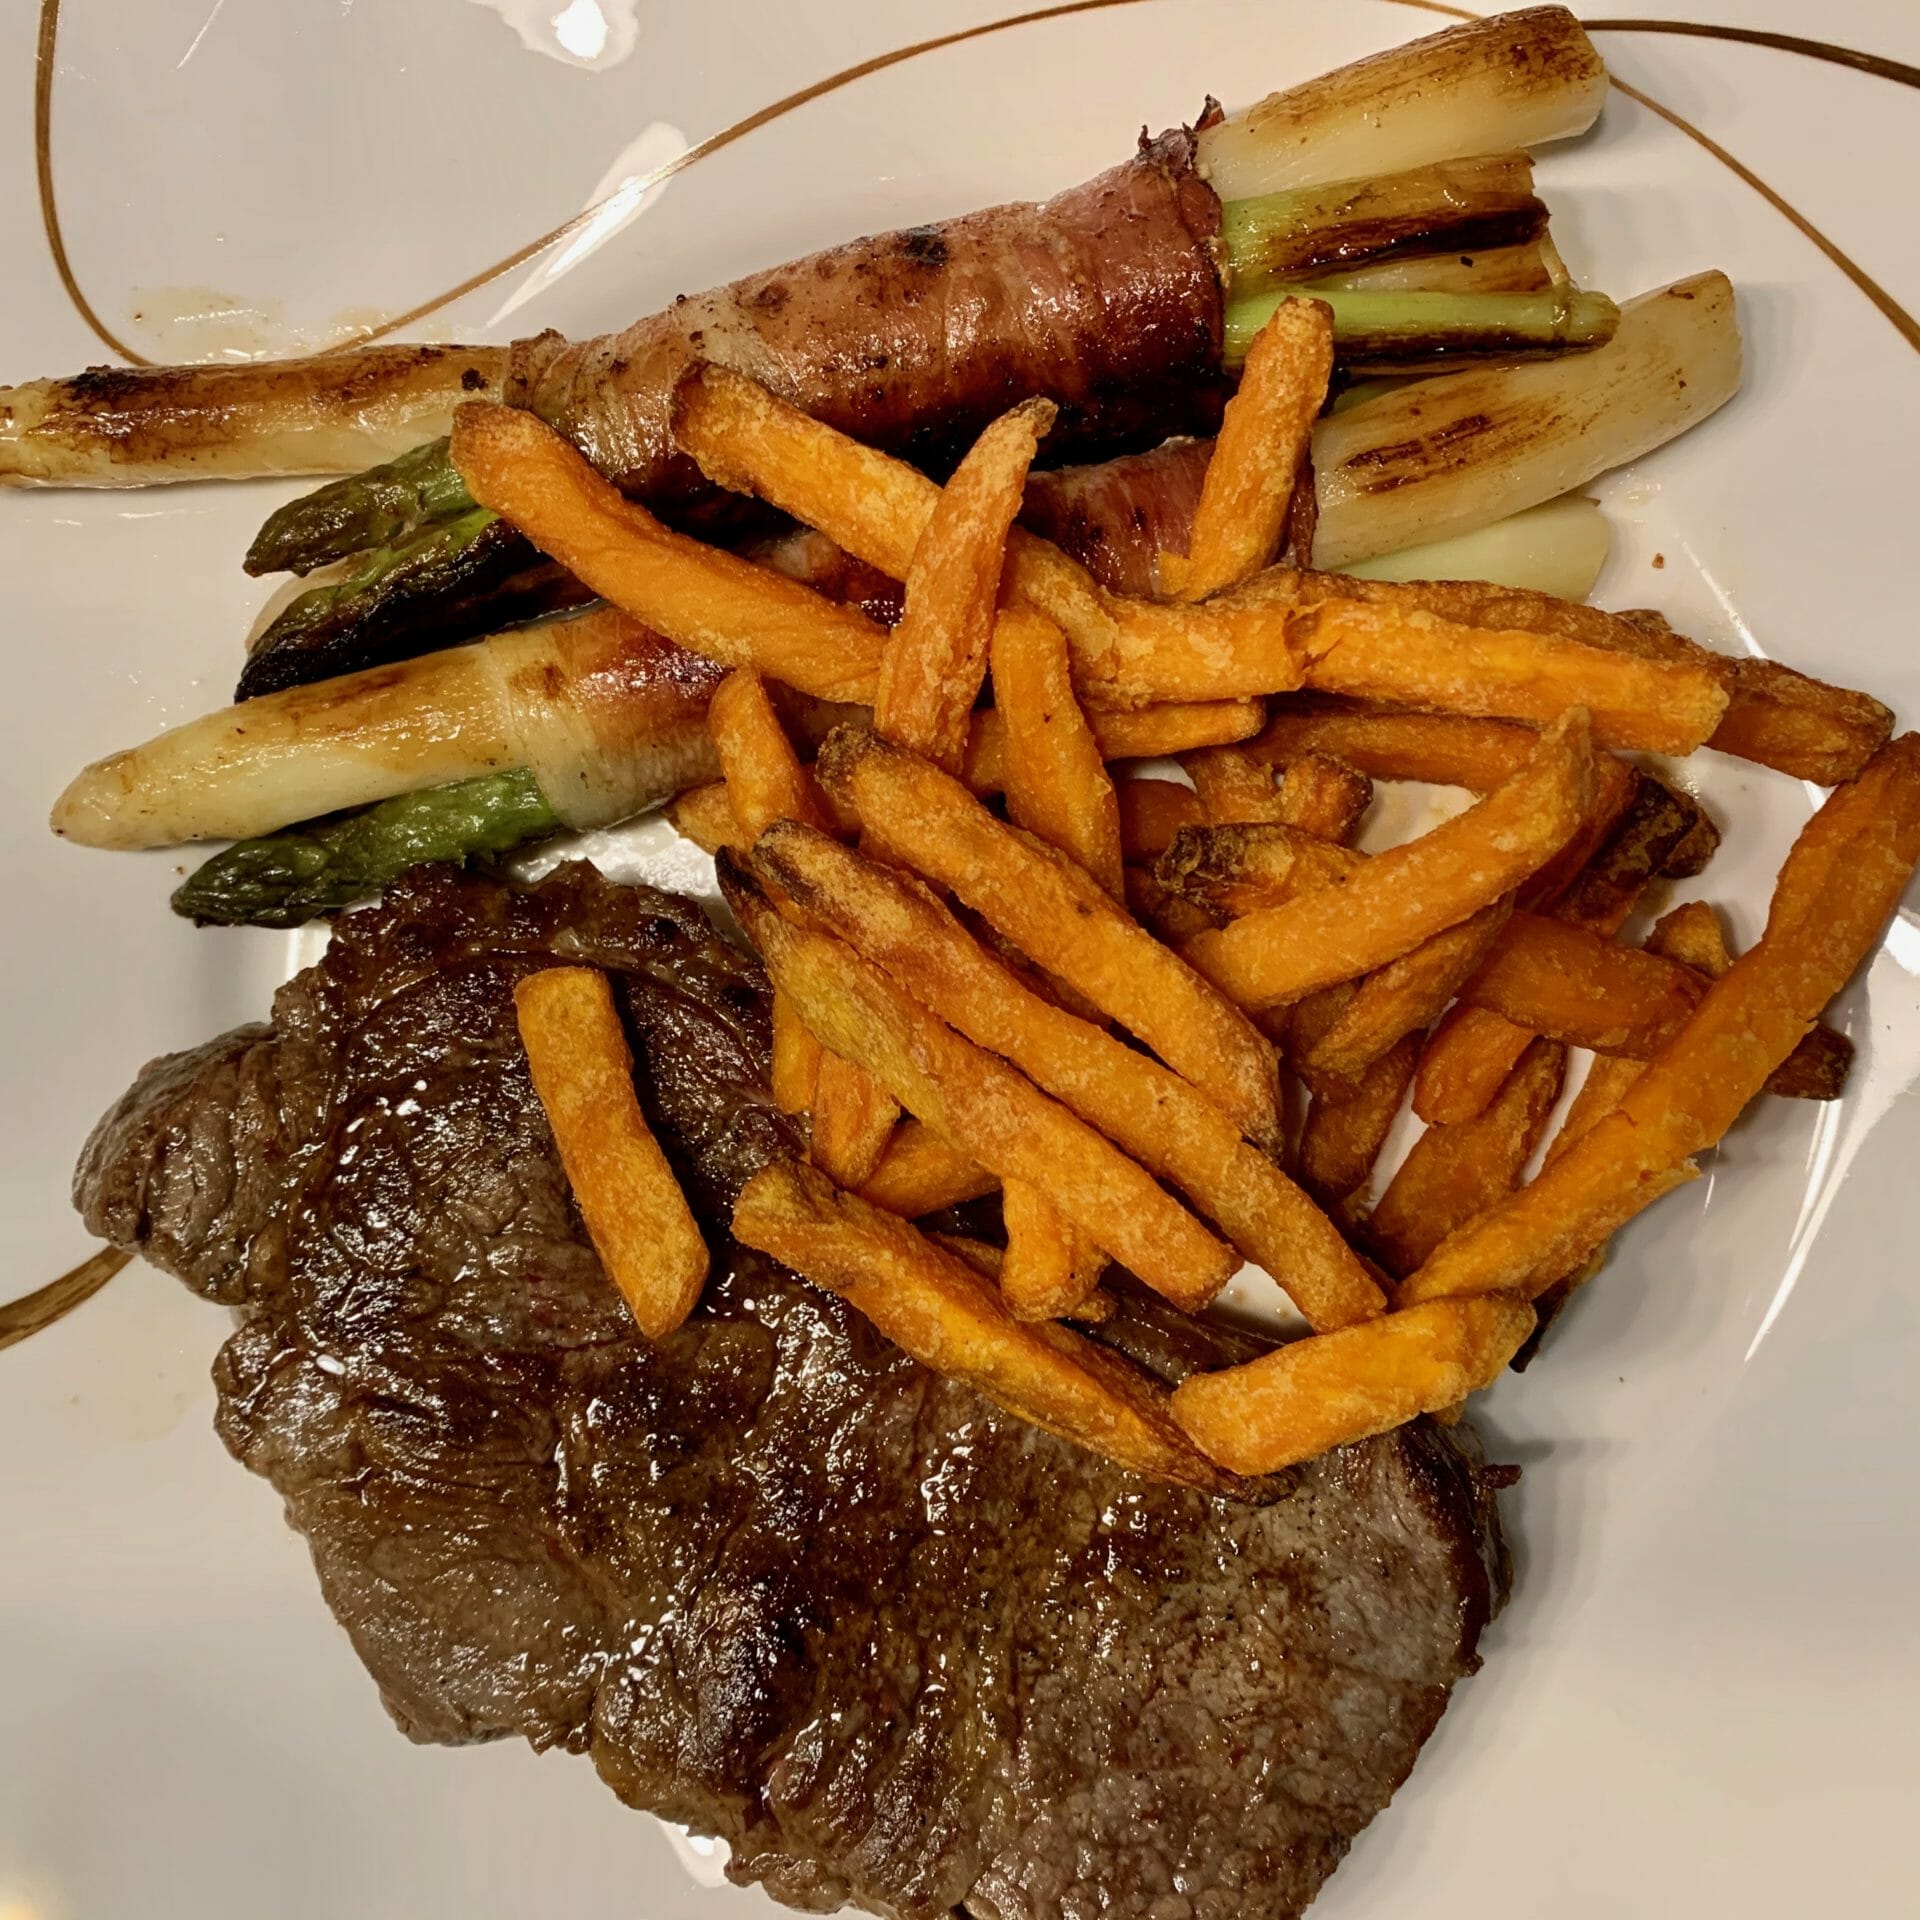 Steak with asparagus and sweet potato fries